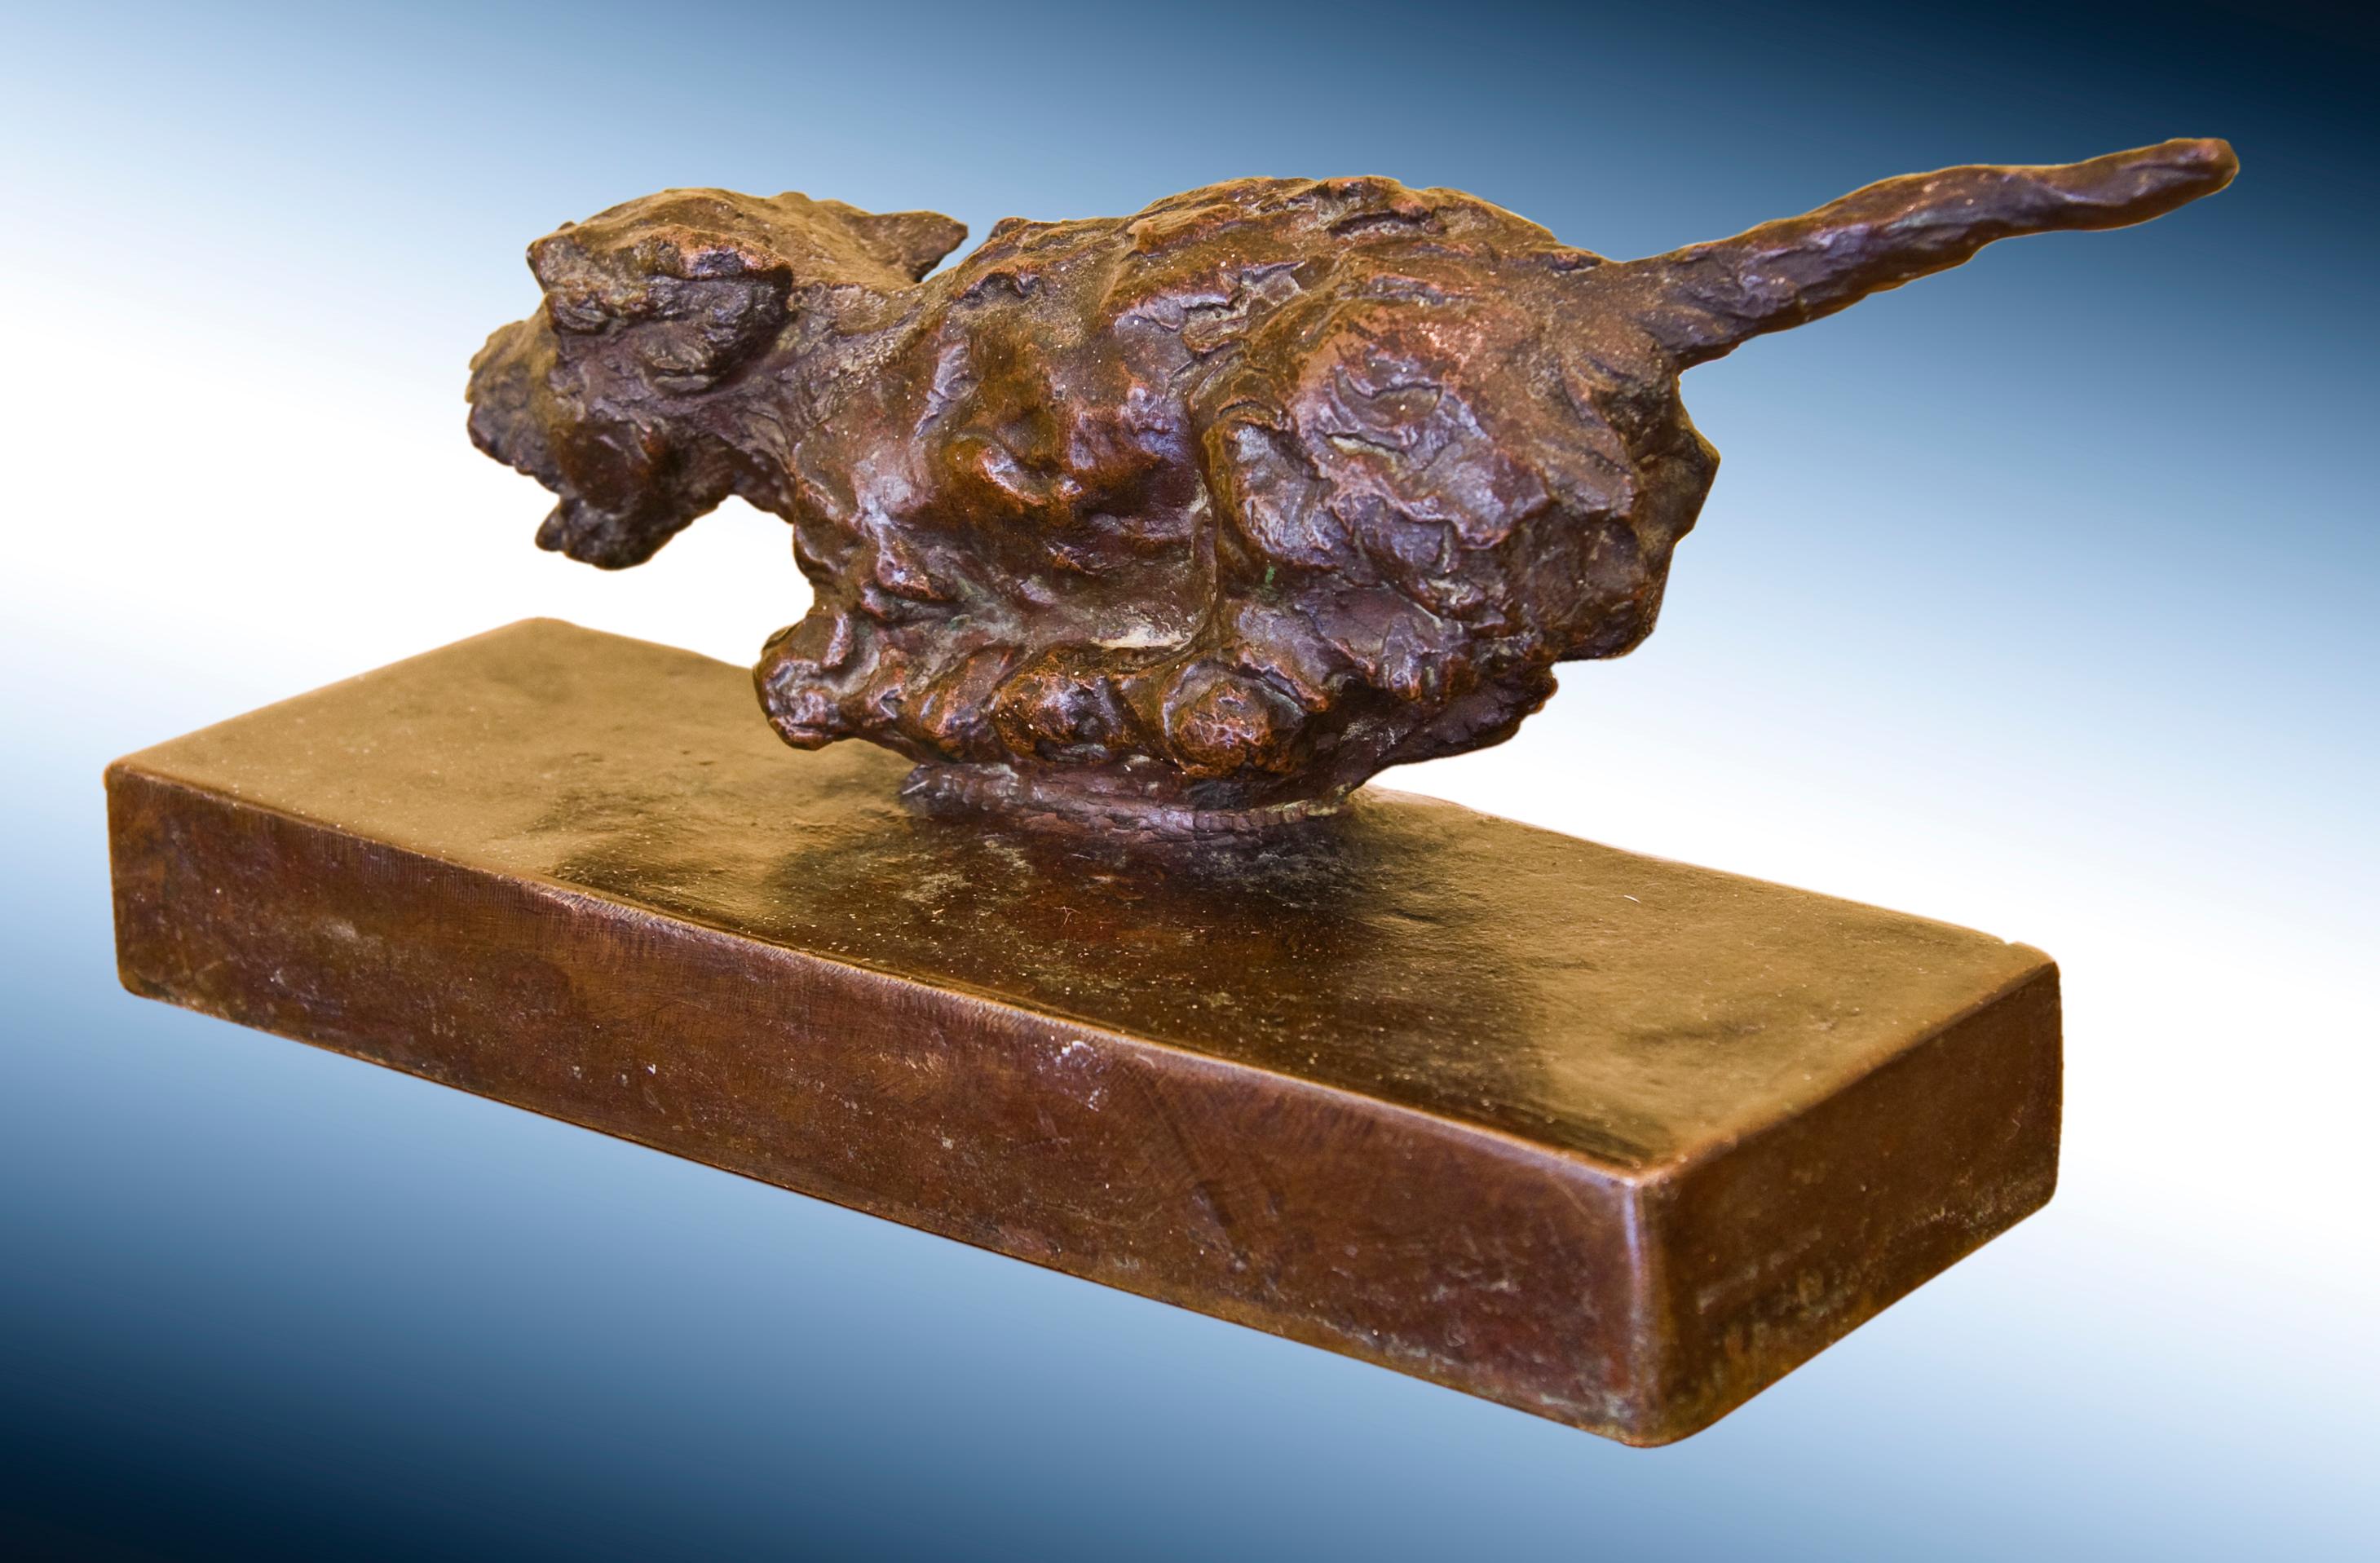 Running Terrier Pups (bookends)  - American Realist Sculpture by Edith Barretto Stevens Parsons